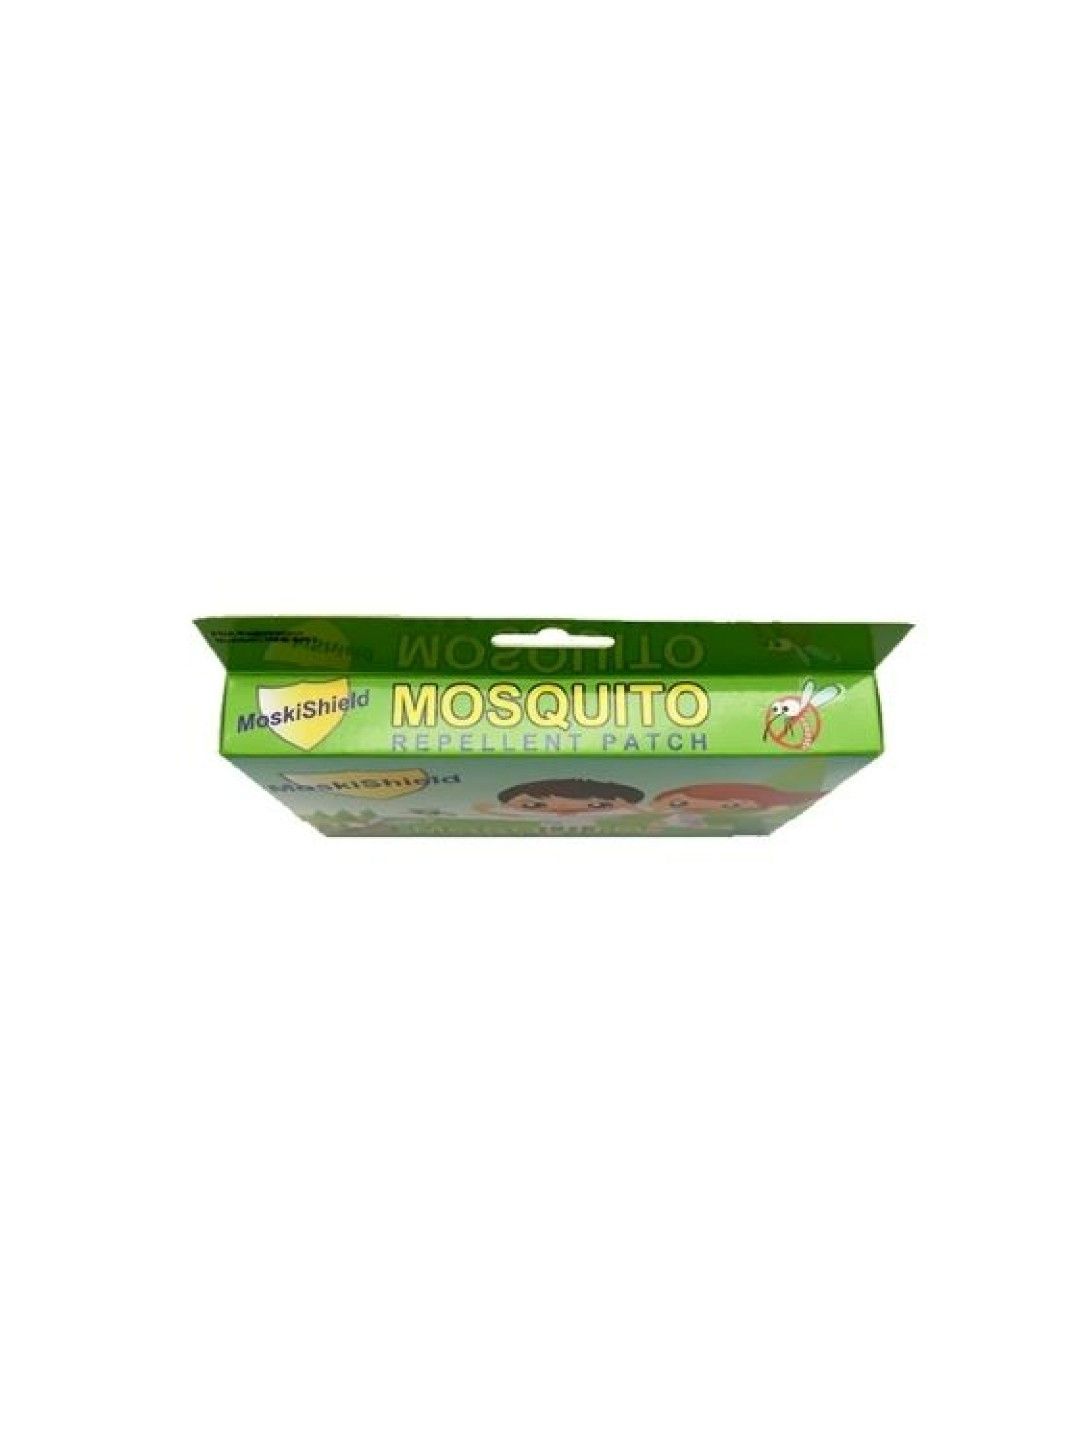 Moskishield Mosquito Repellent Patch (24 patches) (No Color- Image 4)